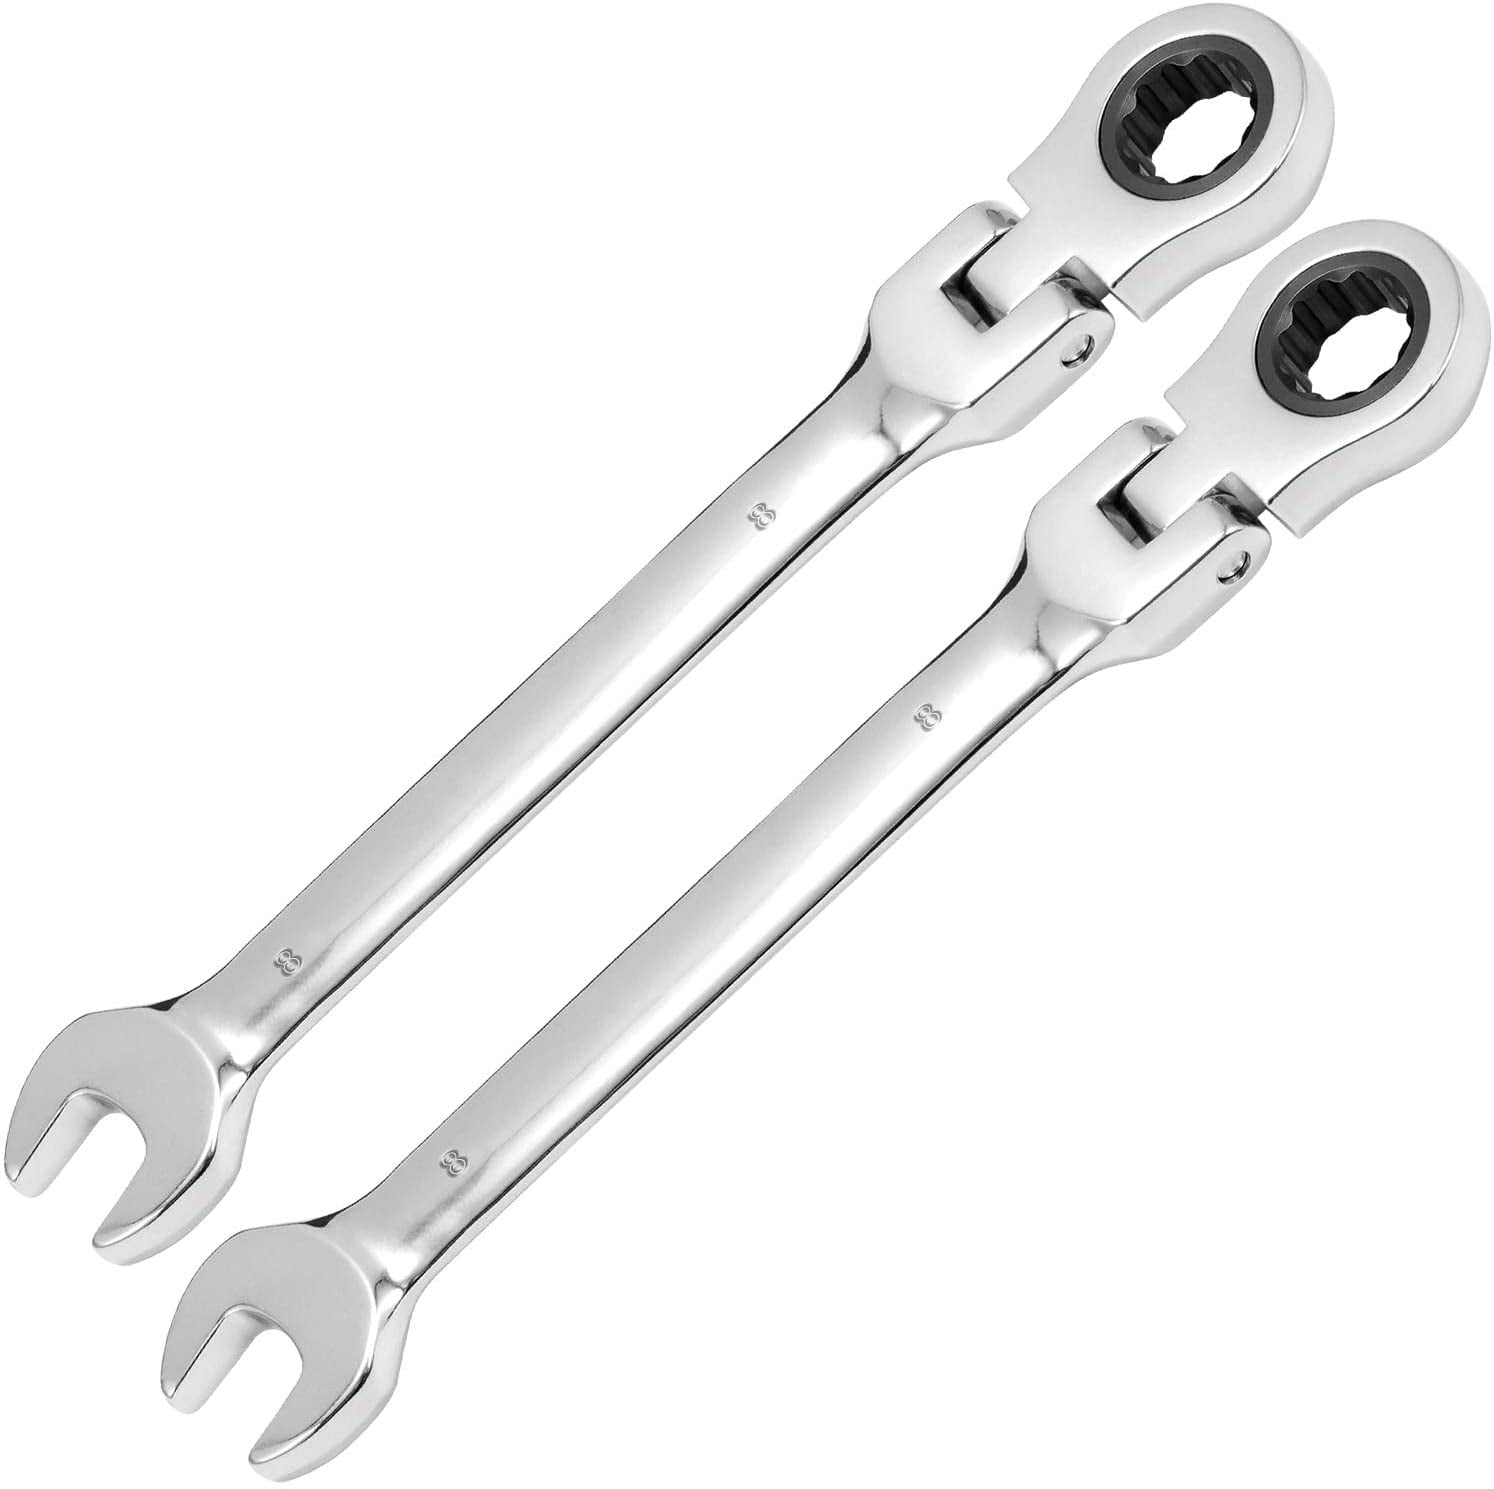 12 Pcs Metric 8-19mm Flexible Head Spanner Gear Ratchet Wrench Set Polished Tool 